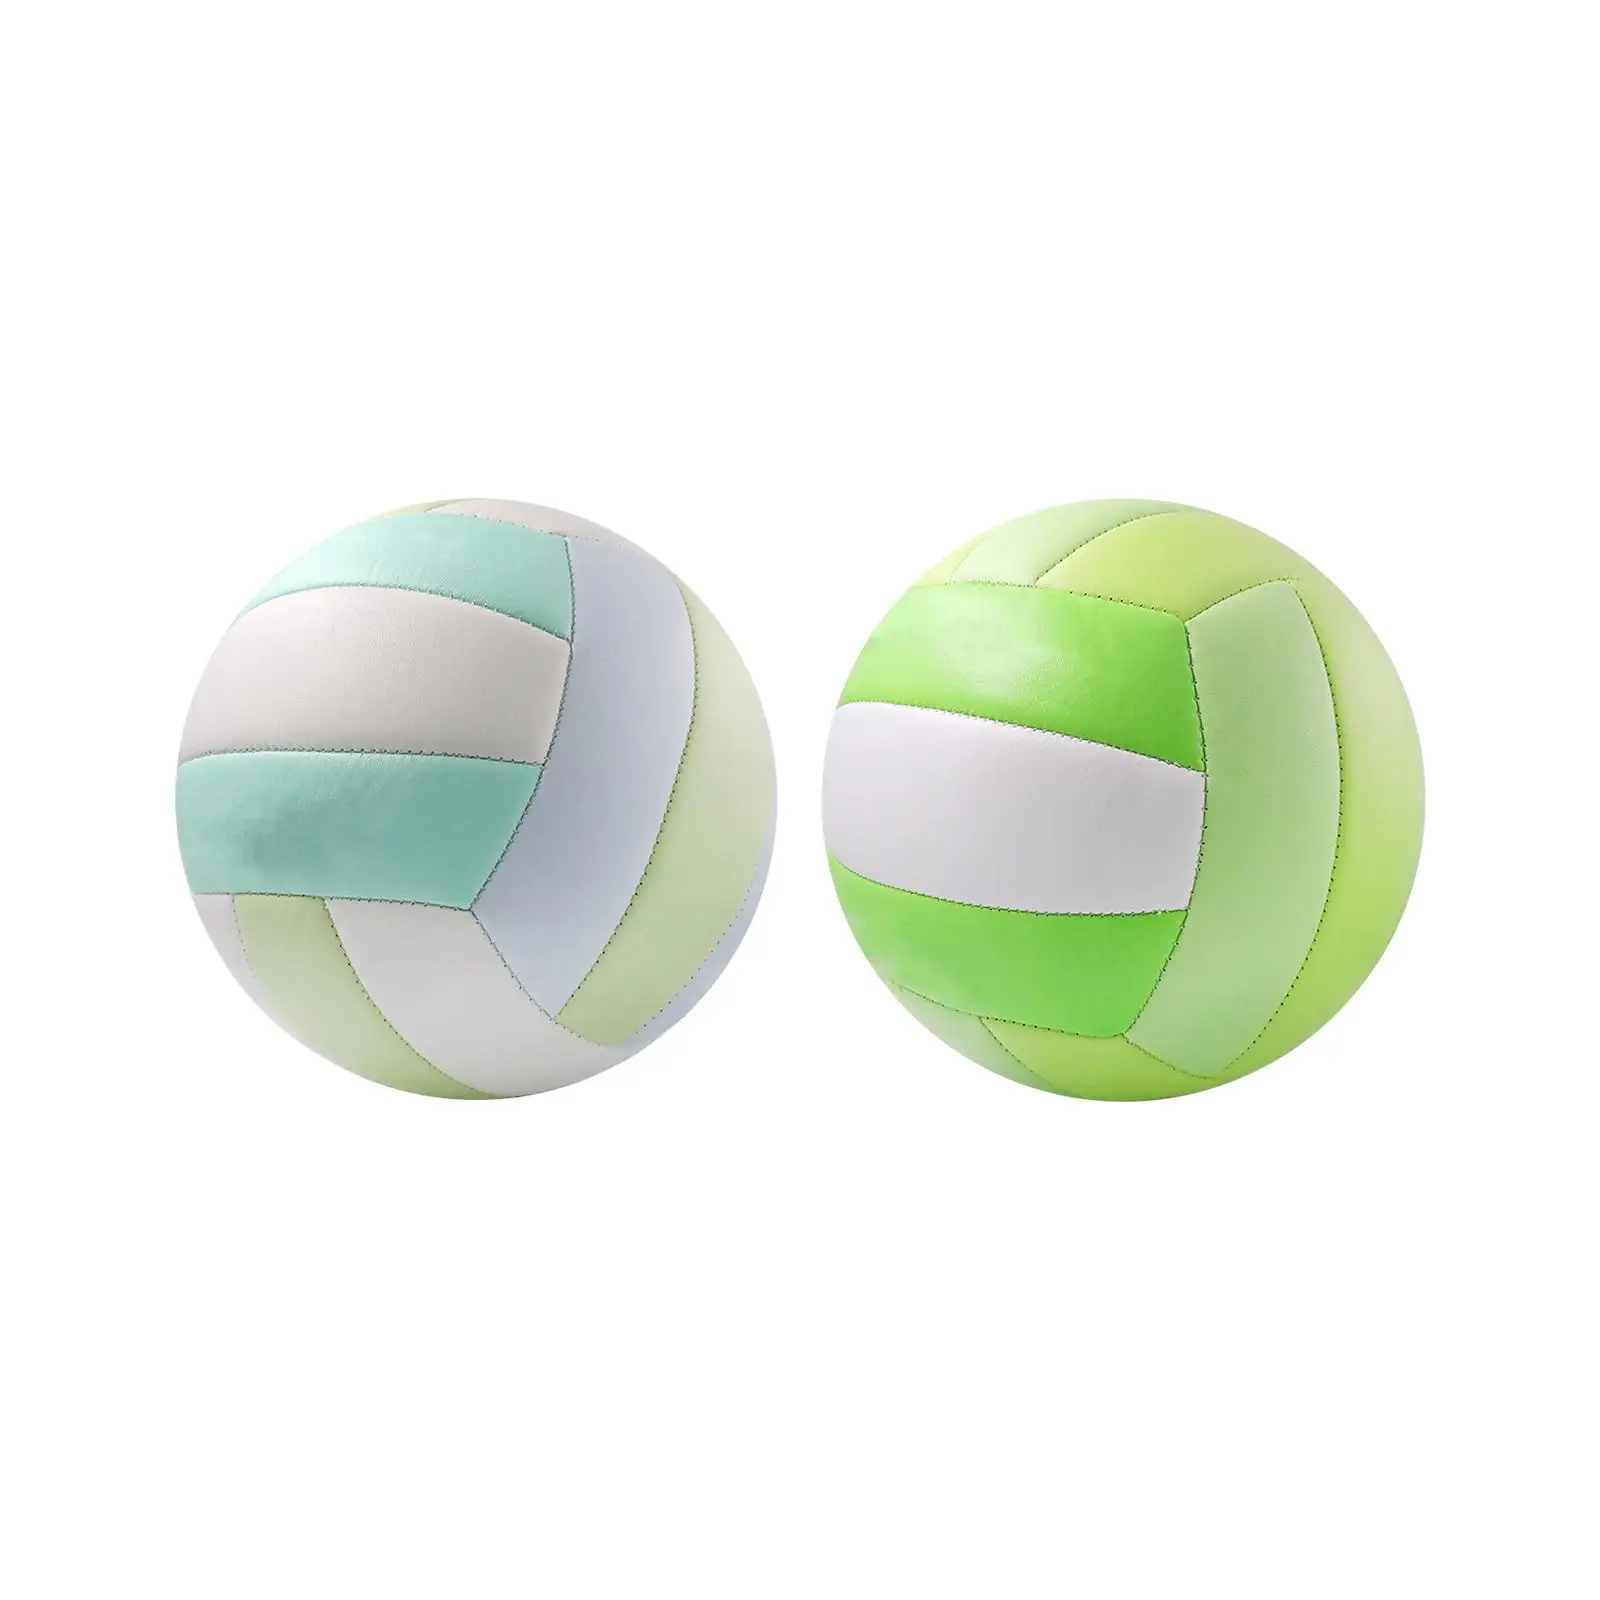 Beach Volleyball Play Pool Official Size 5 Volleyball Indoor Outdoor Volleyball for Kids Teenager Beginners Girls Boys